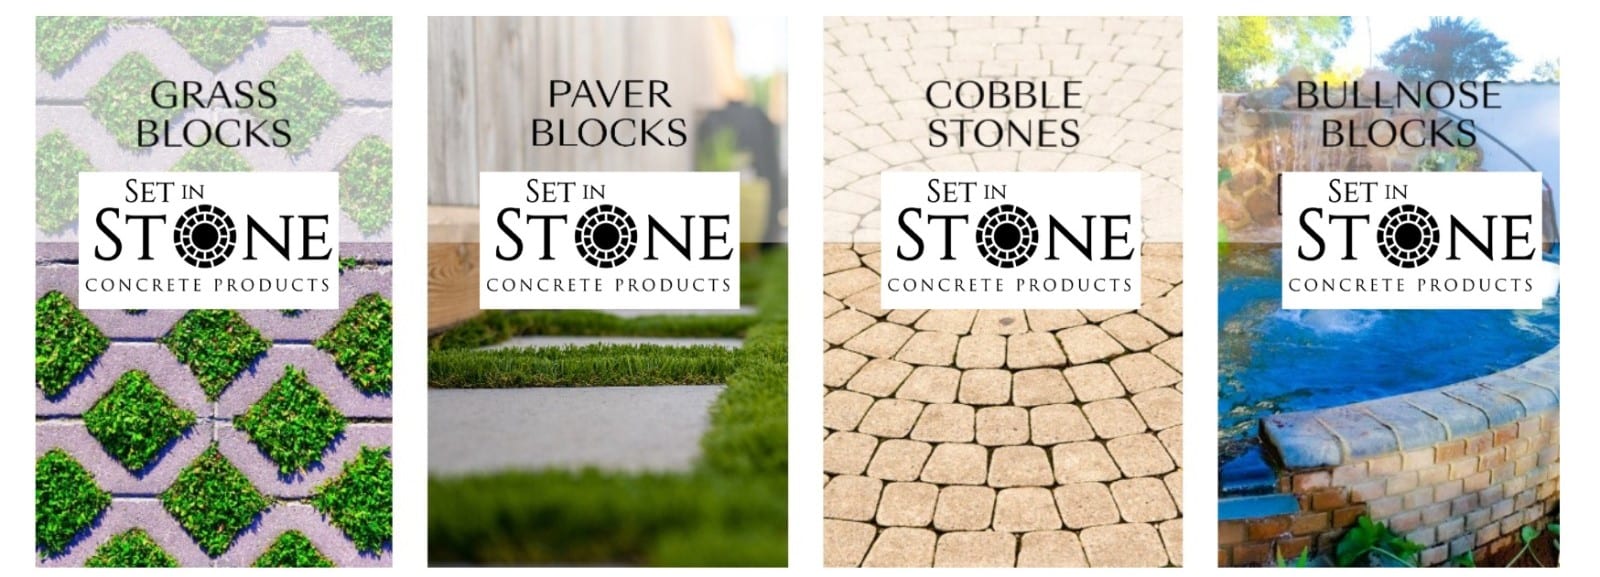 Set in Stone Concrete Products 8